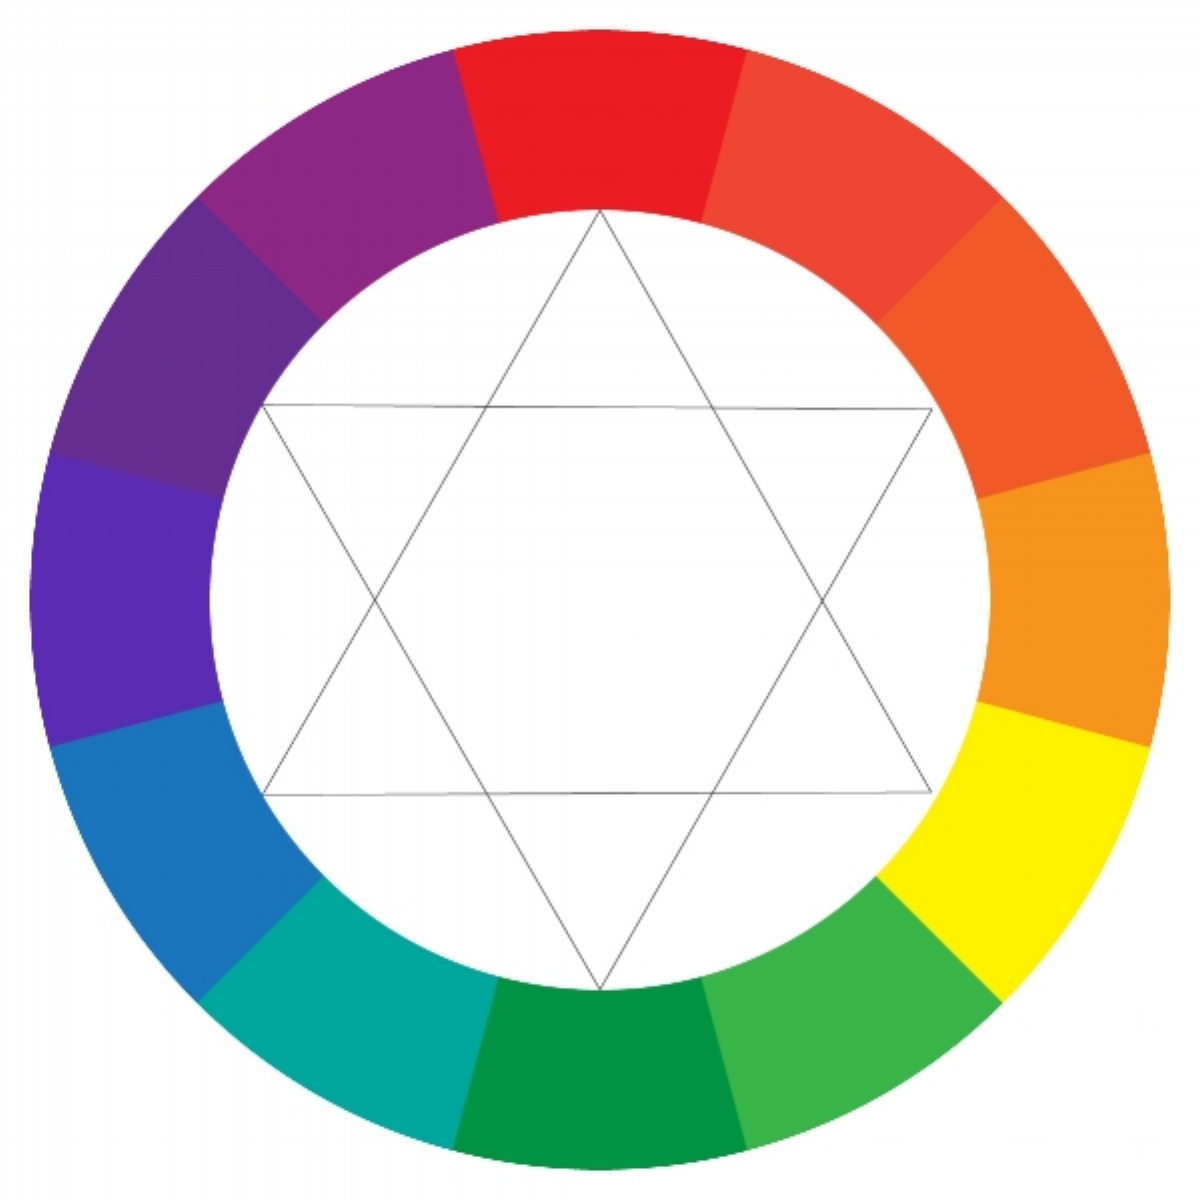 Beyond Basic Color Theory—Four Things More Important Than the Color